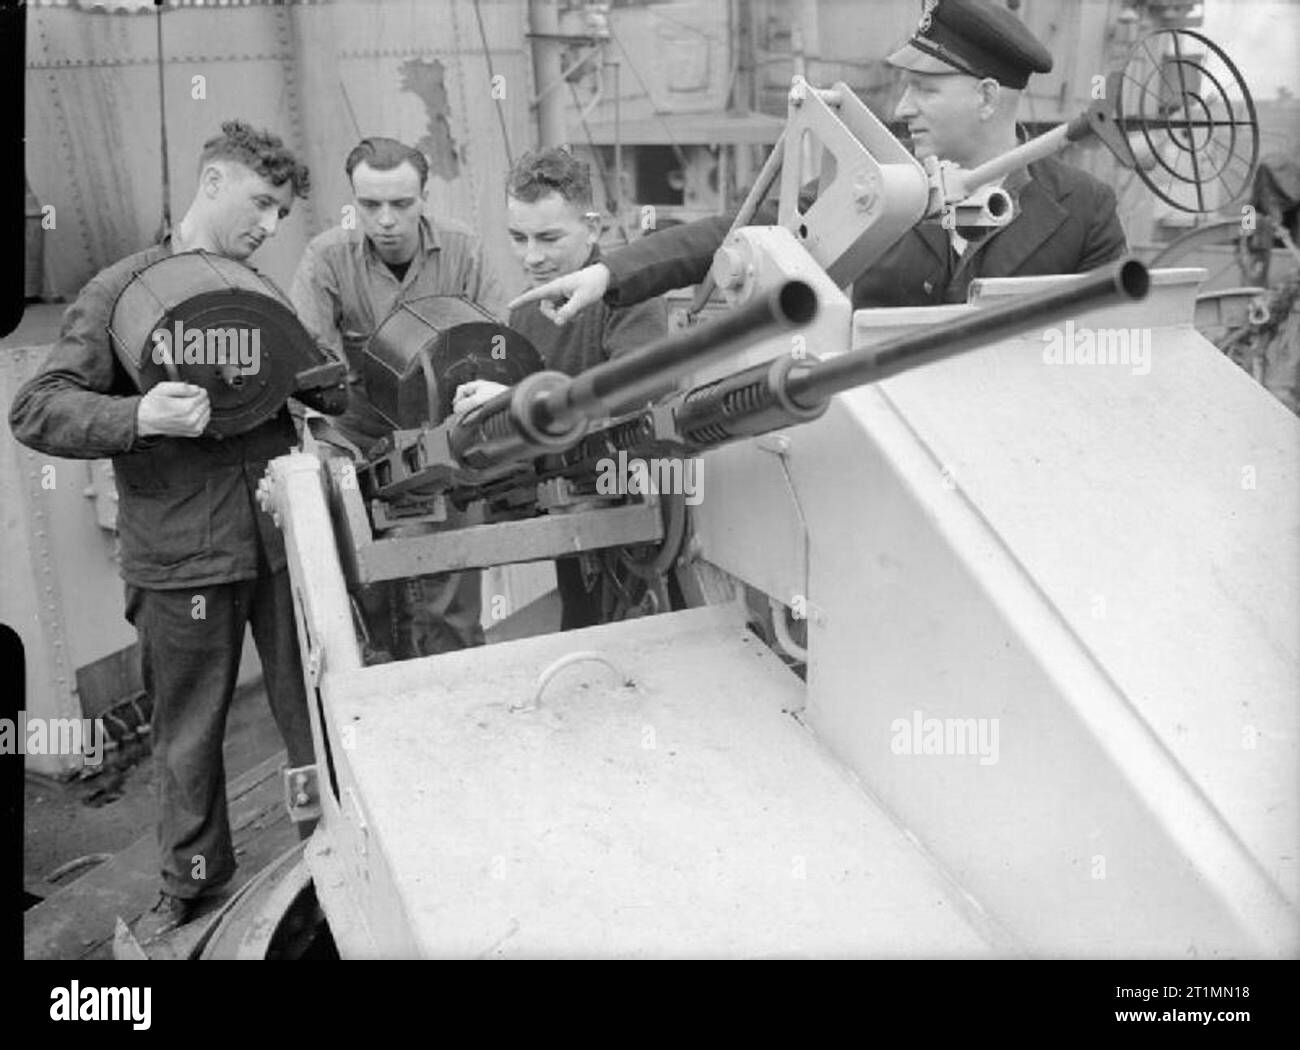 The Royal Navy during the Second World War 20 mm Oerlikon gunners of HMS STARLING on arrival at Liverpool. Left to right: Able Seaman Edward O'Malley, of Stockport, Cheshire (about to fix a fresh magazine of ammunition to the gun); Able Seaman John Smith of Islington, London; Able Seaman Edward Webster, of Dundee; and Petty Officer William G Barnshaw, of Callington, Cornwall. Stock Photo